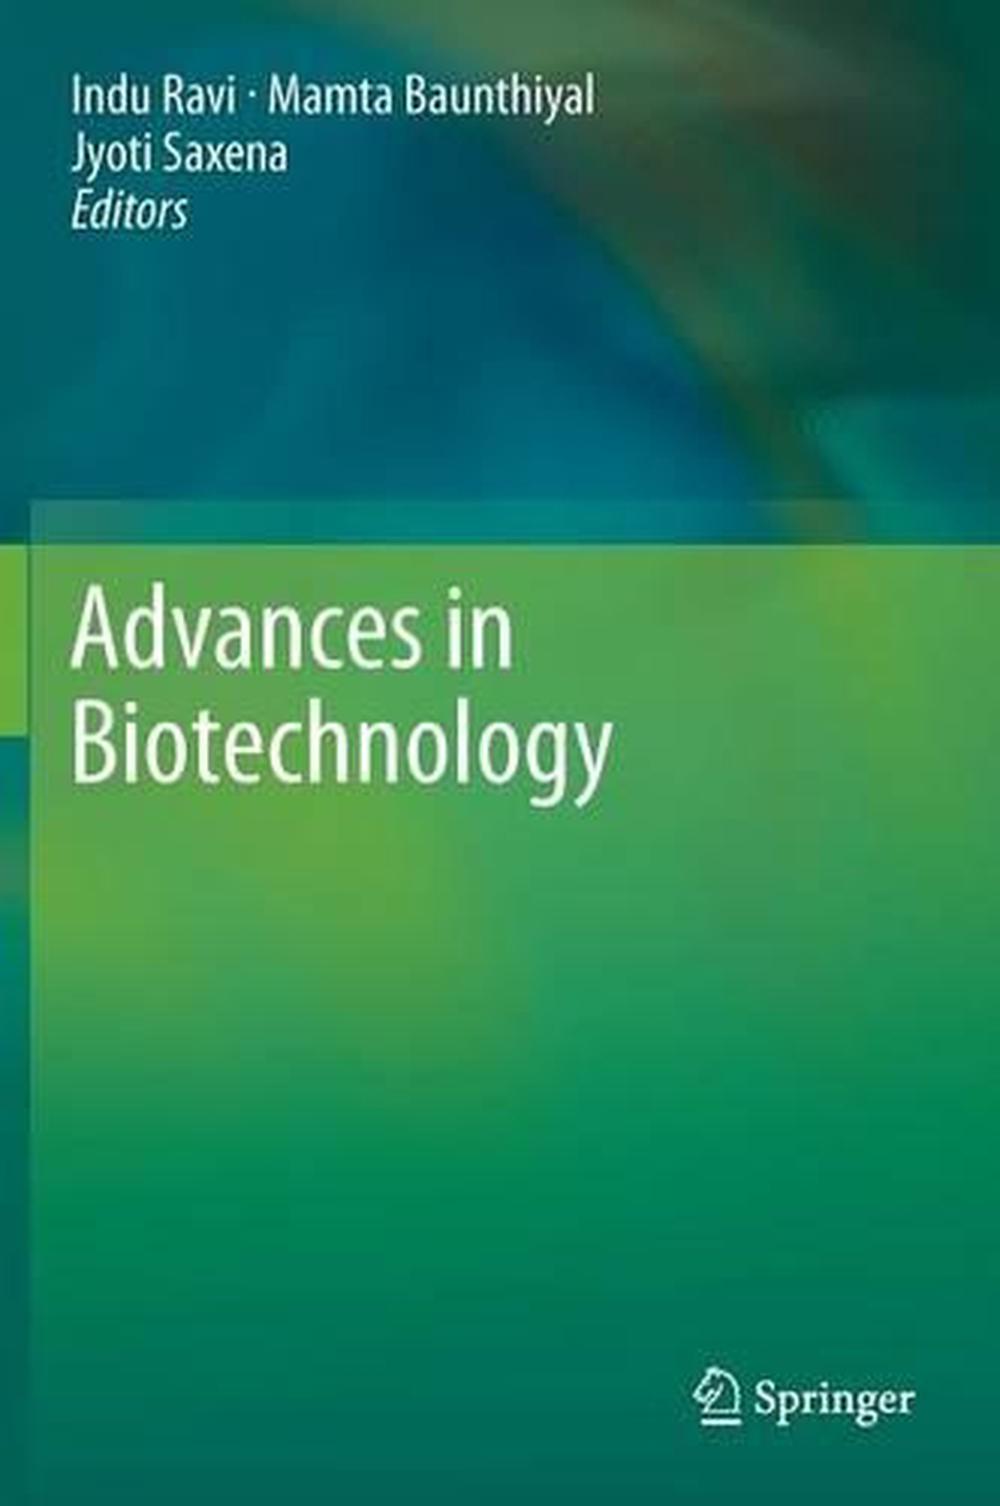 research books on biotechnology